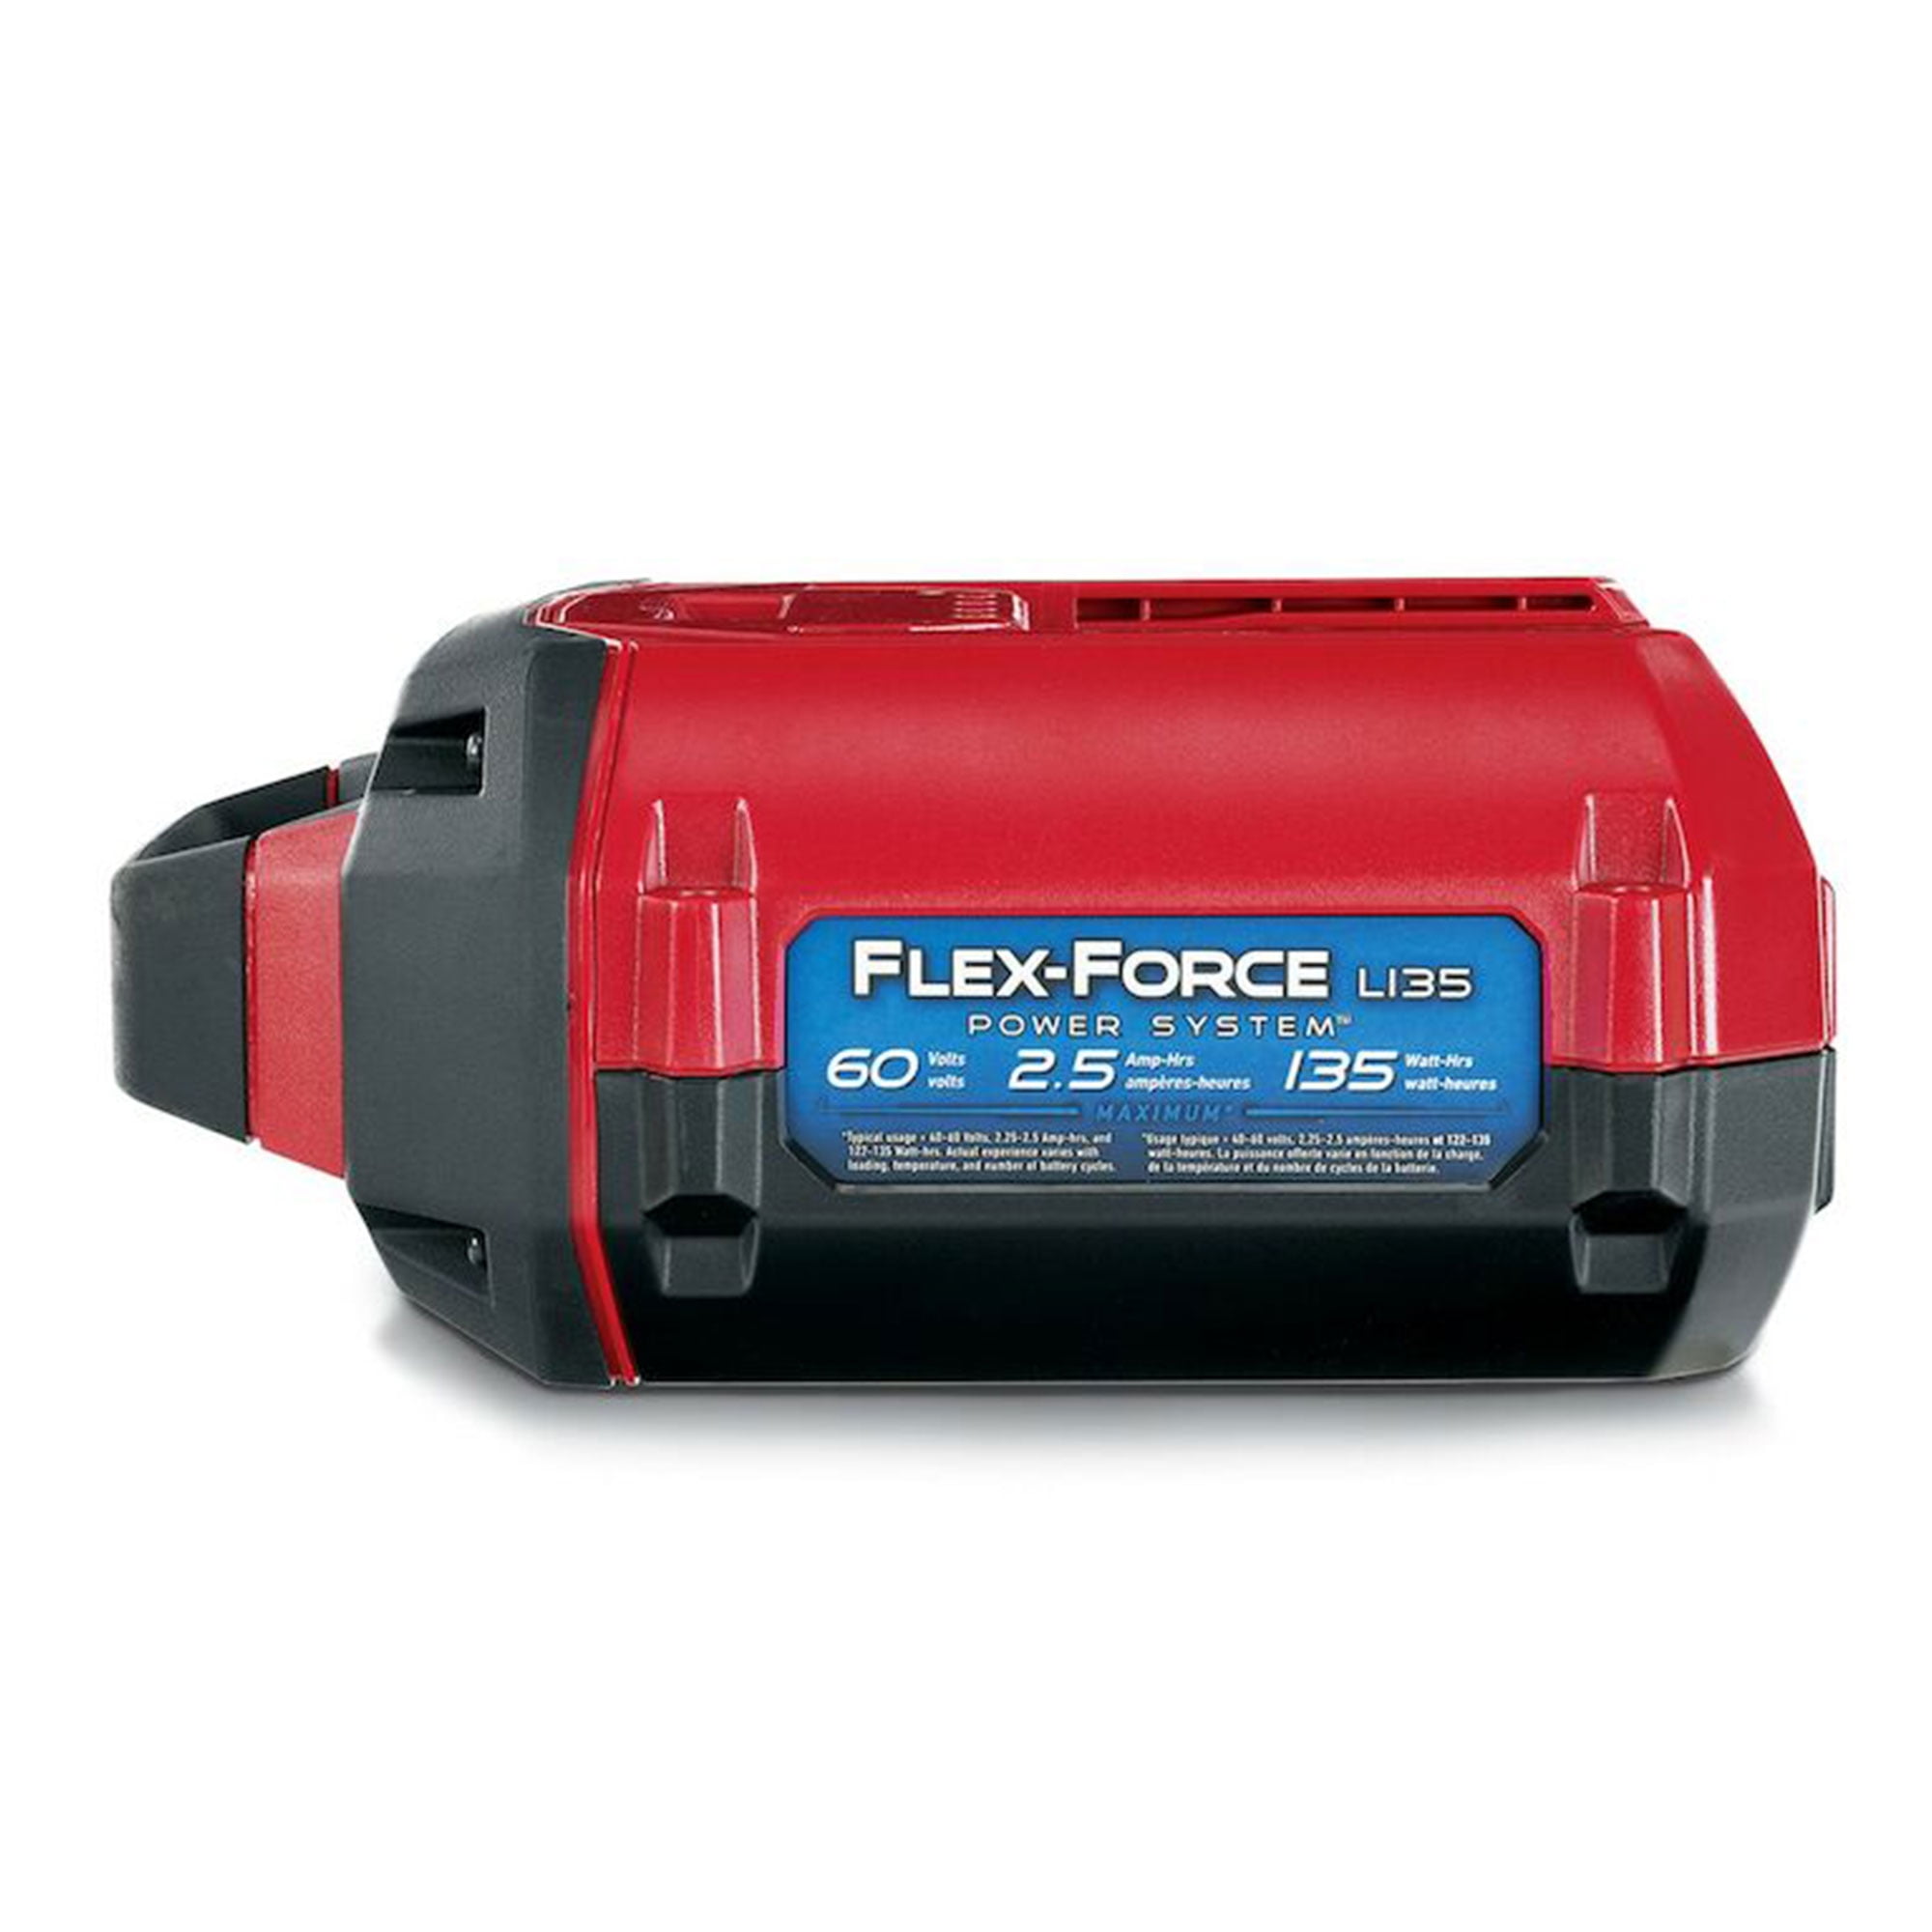 Picture of Toro 7006682 Flex-Force L135 60V 2.52 Ah Lithium-Ion Battery Pack